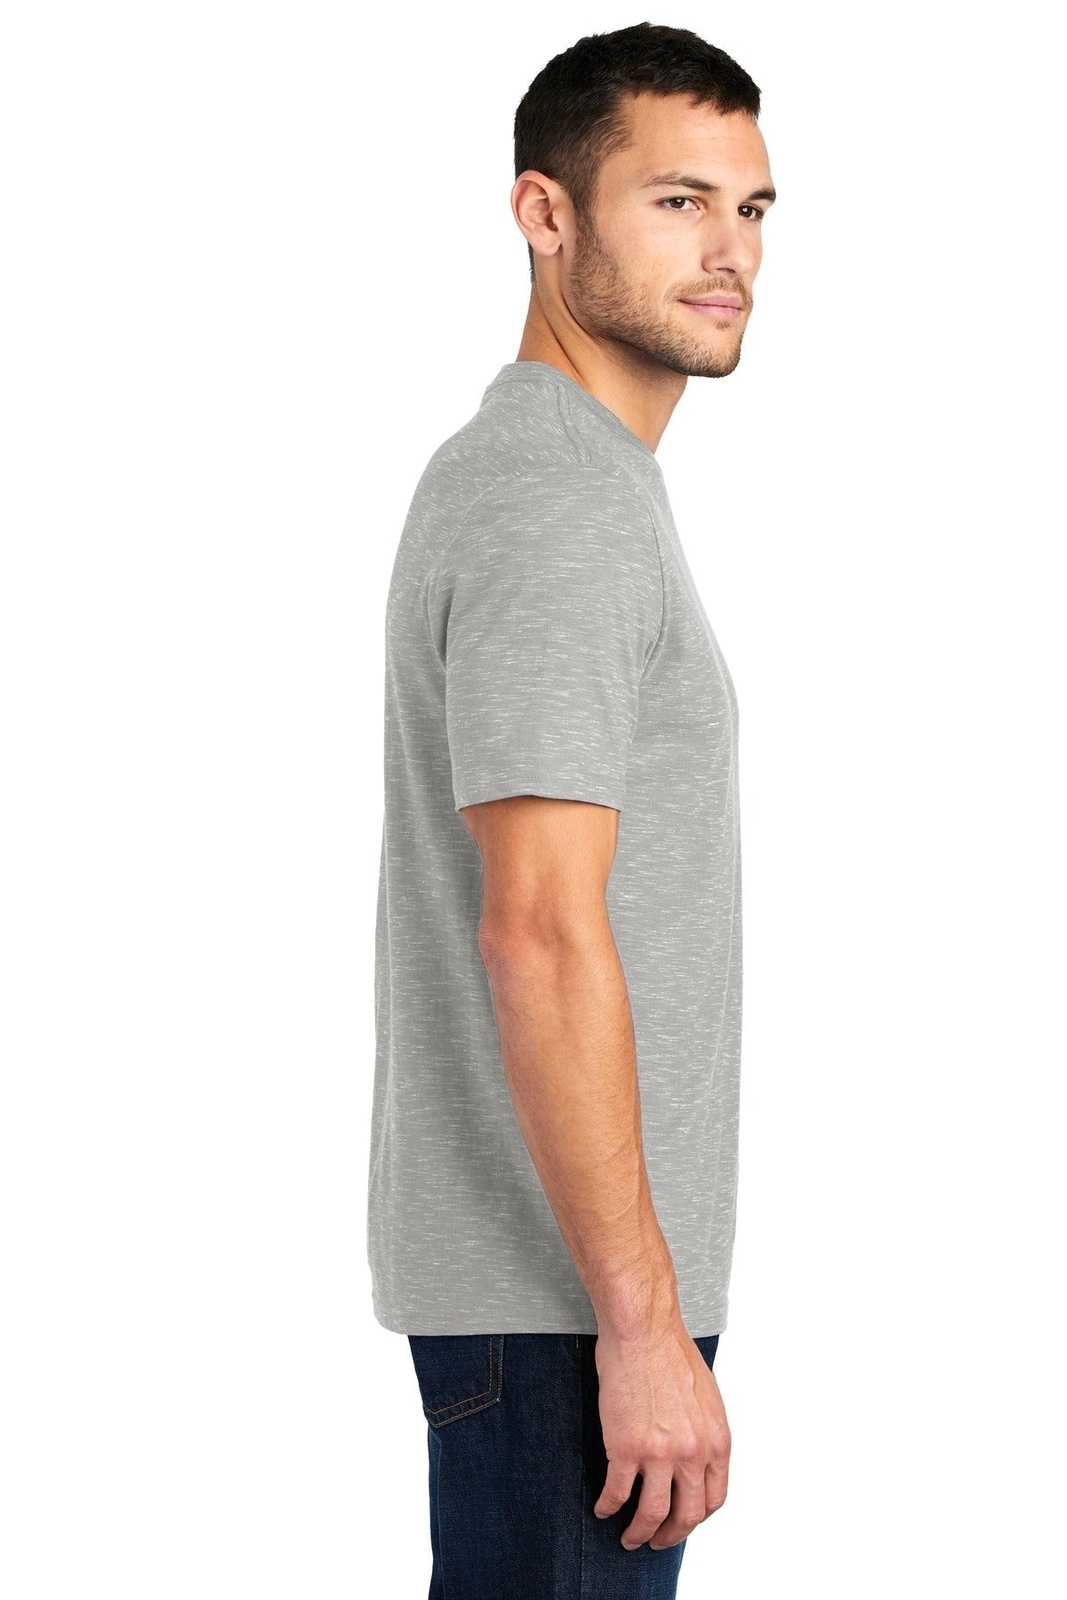 District DT564 Medal Tee - Light Gray - HIT a Double - 3